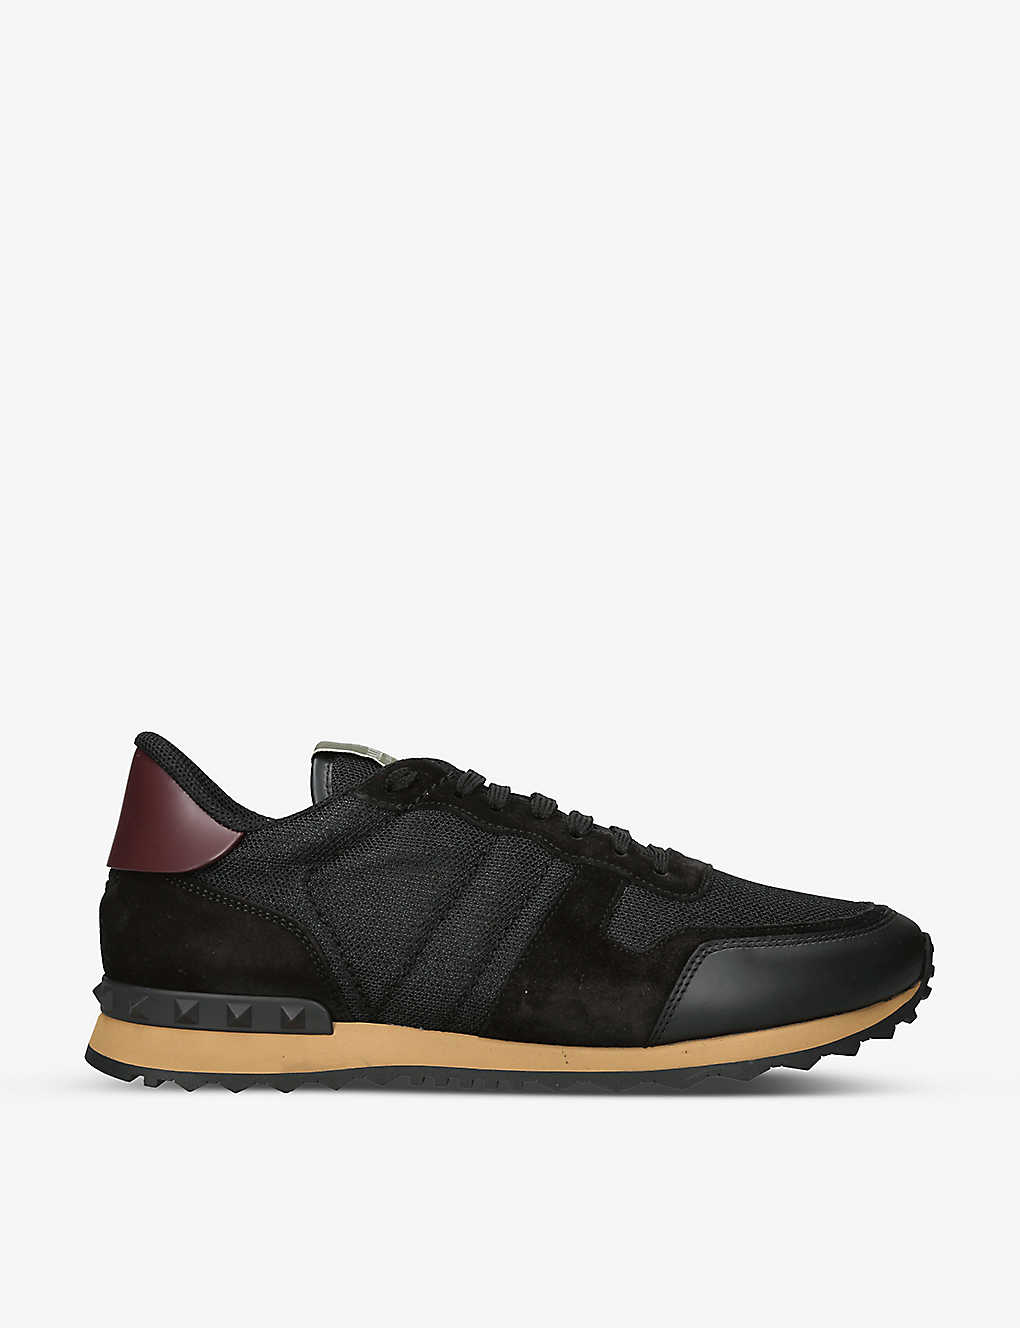 Valentino Garavani Men's Blk/other Rockrunner Leather, Suede And Mesh Low-top Trainers